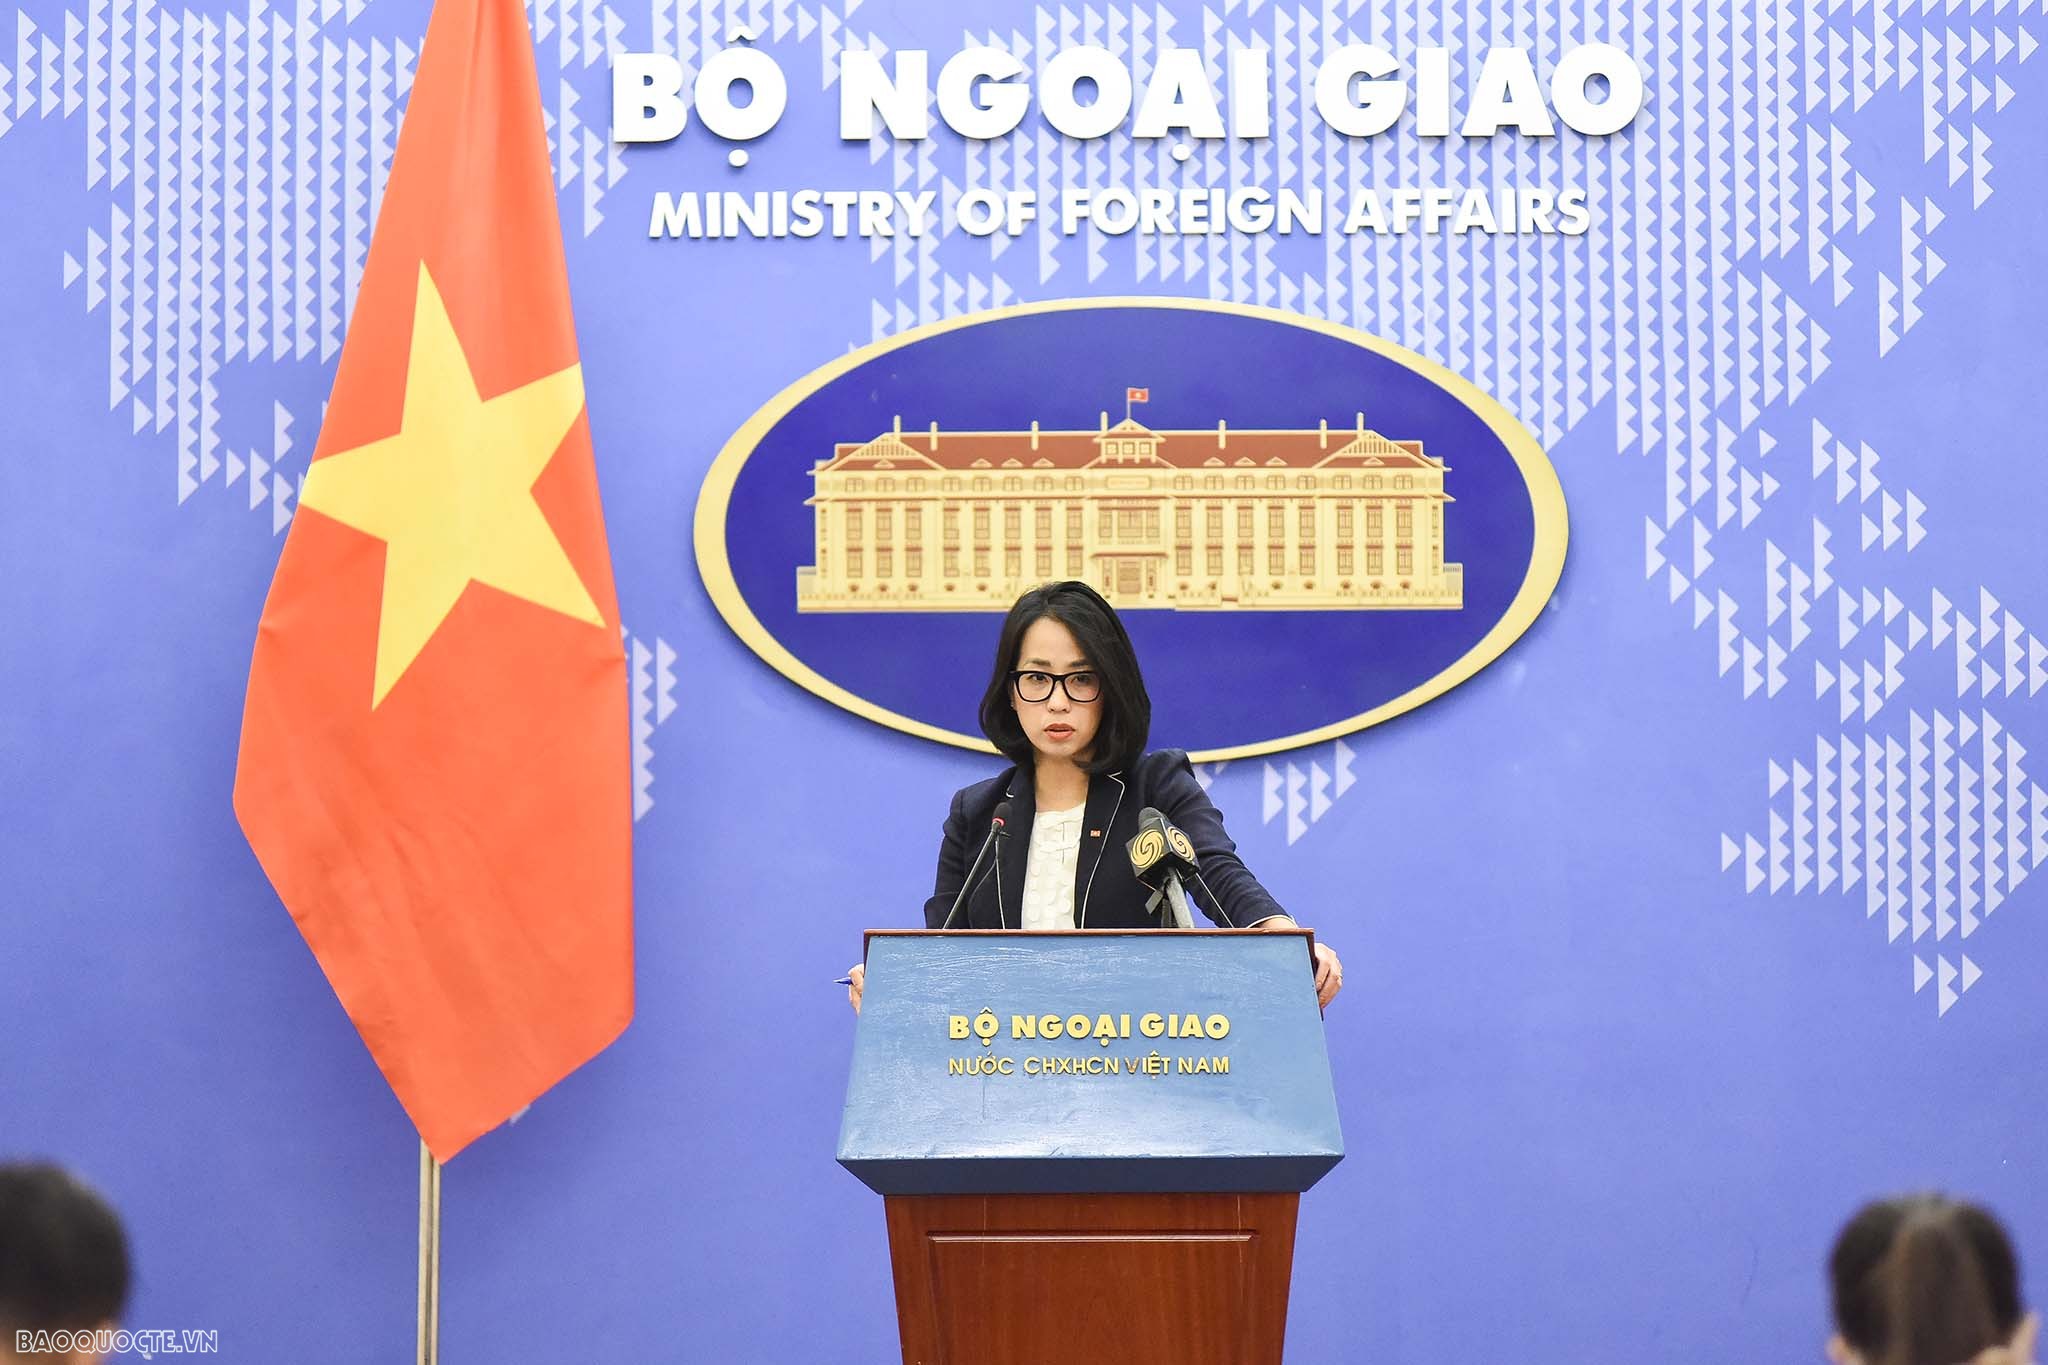 Protecting, promoting human rights is Vietnam's consistent policy: Deputy Spokesperson